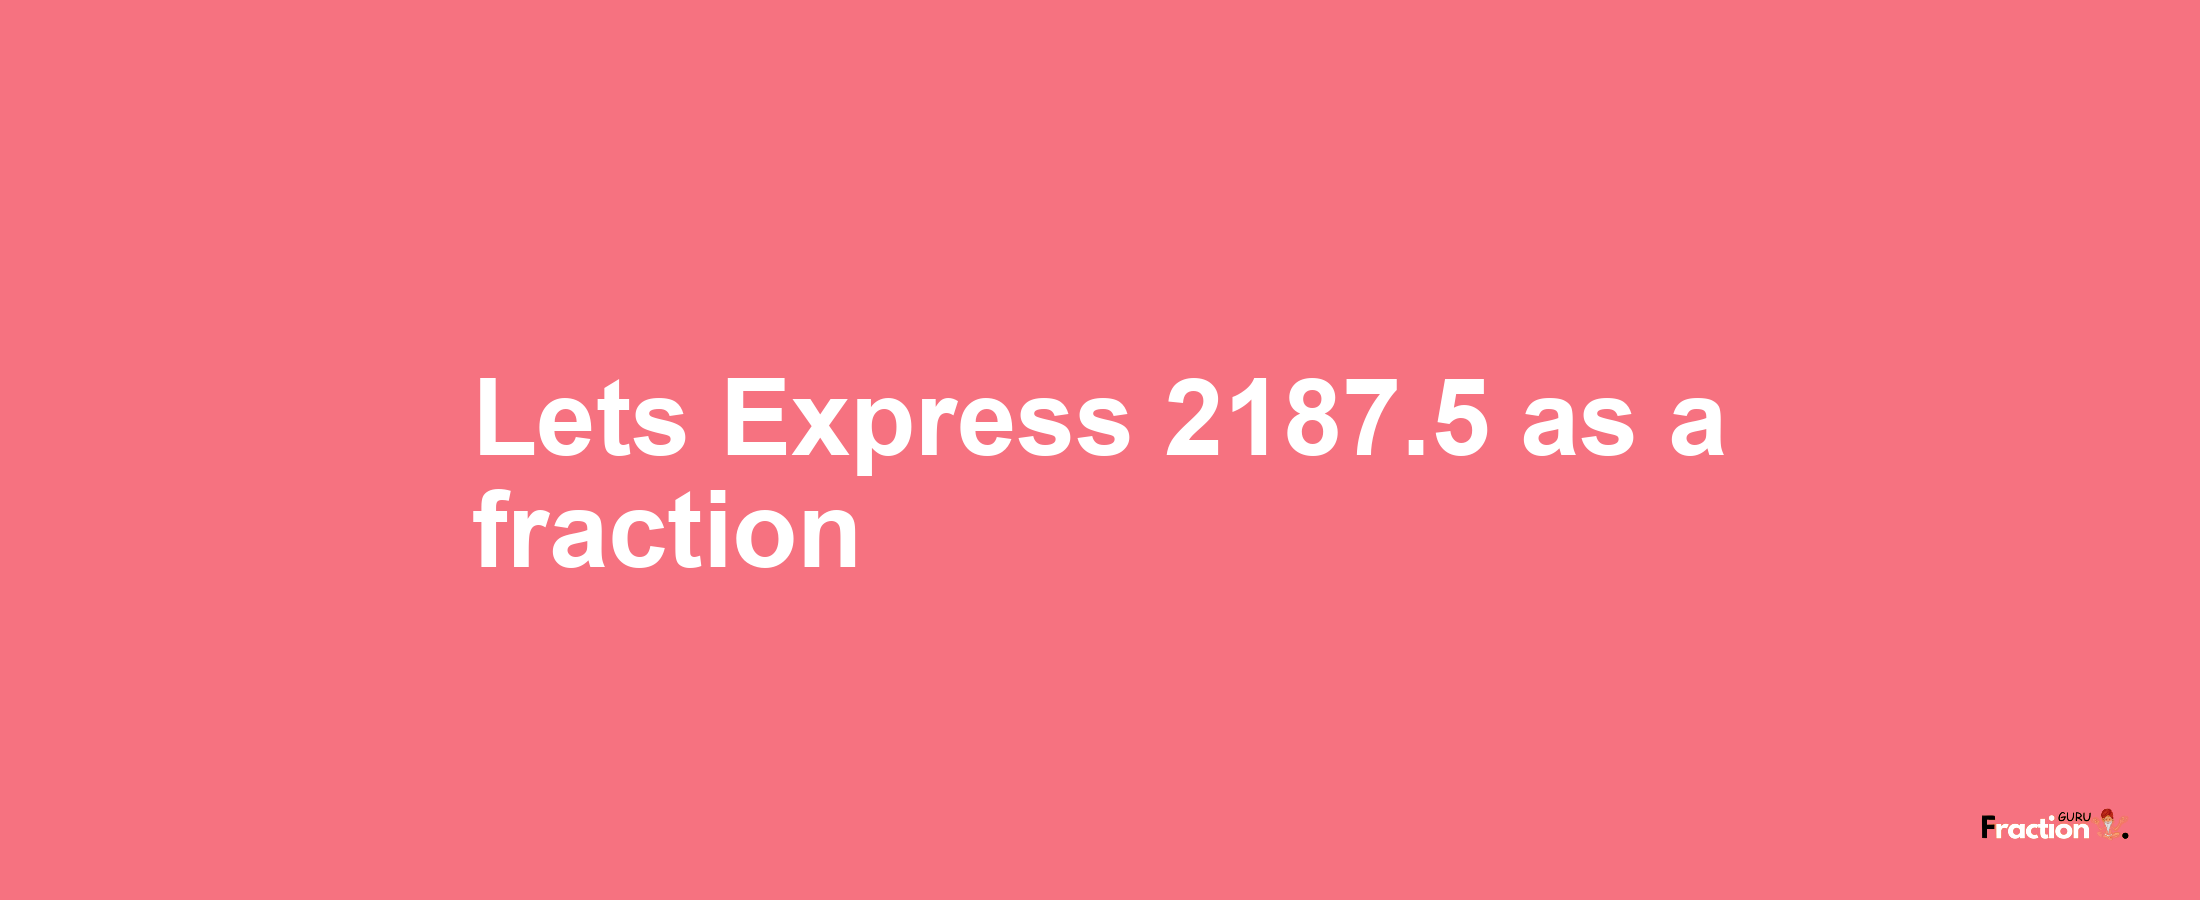 Lets Express 2187.5 as afraction